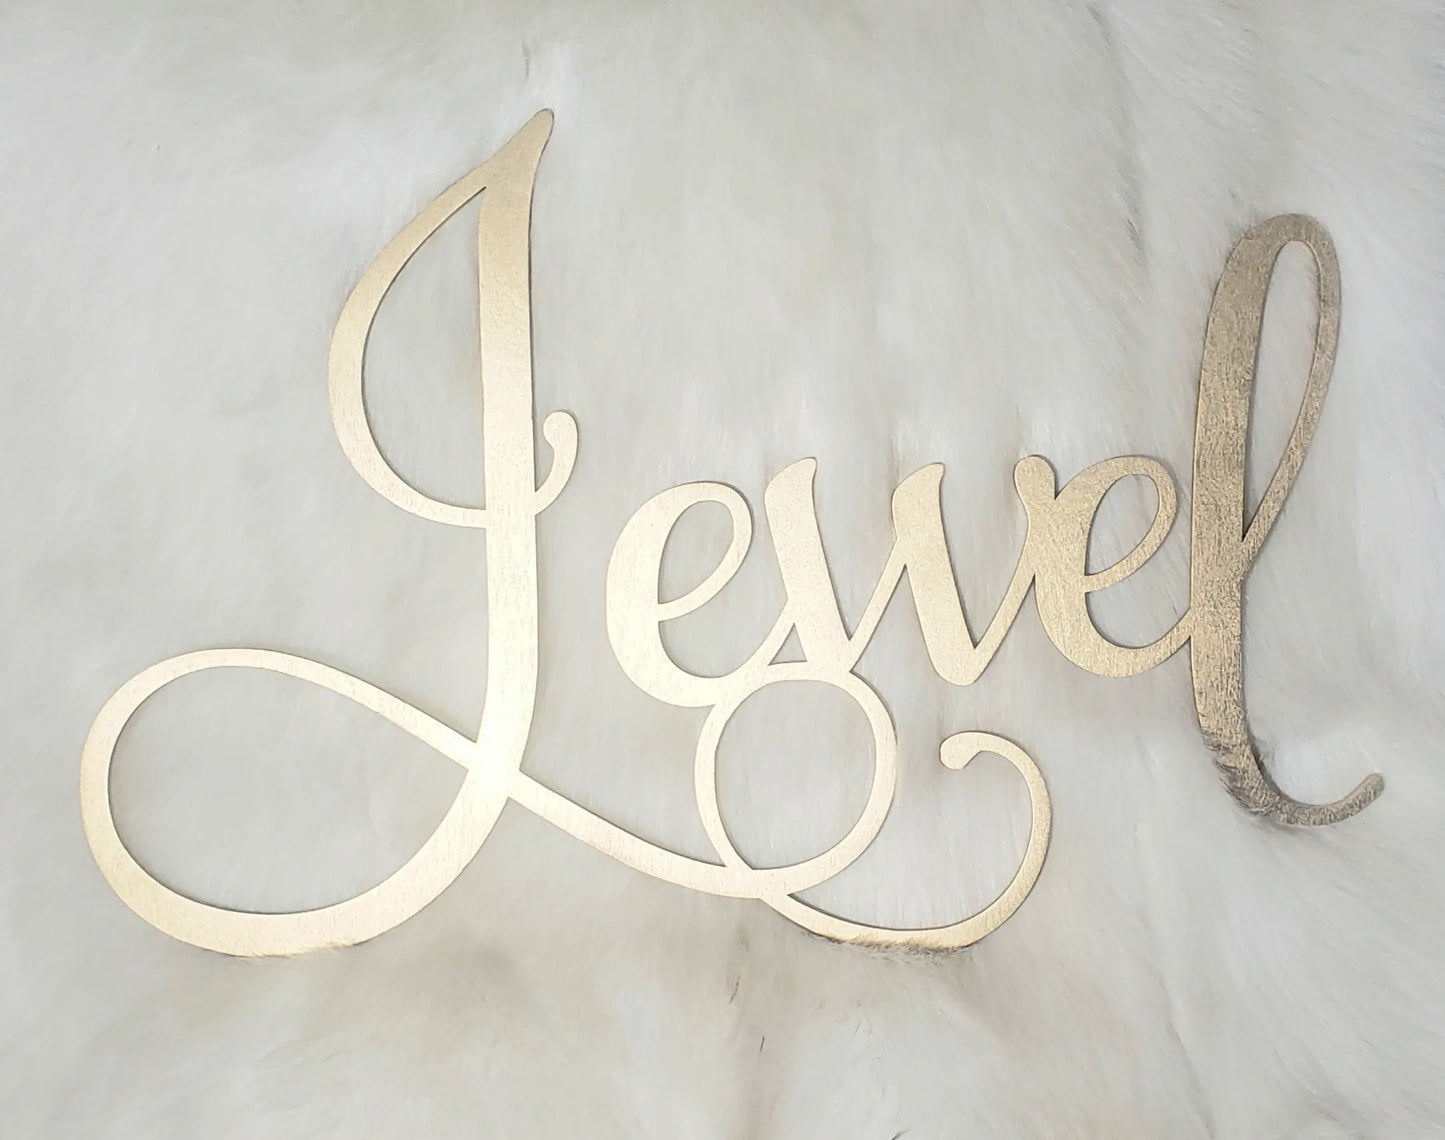 Custom Name Nursery Decor, Baby Nursery Wall Name Sign, Custom Kids Room Name Sign, Large Wooden Letters, Baby Shower Gift